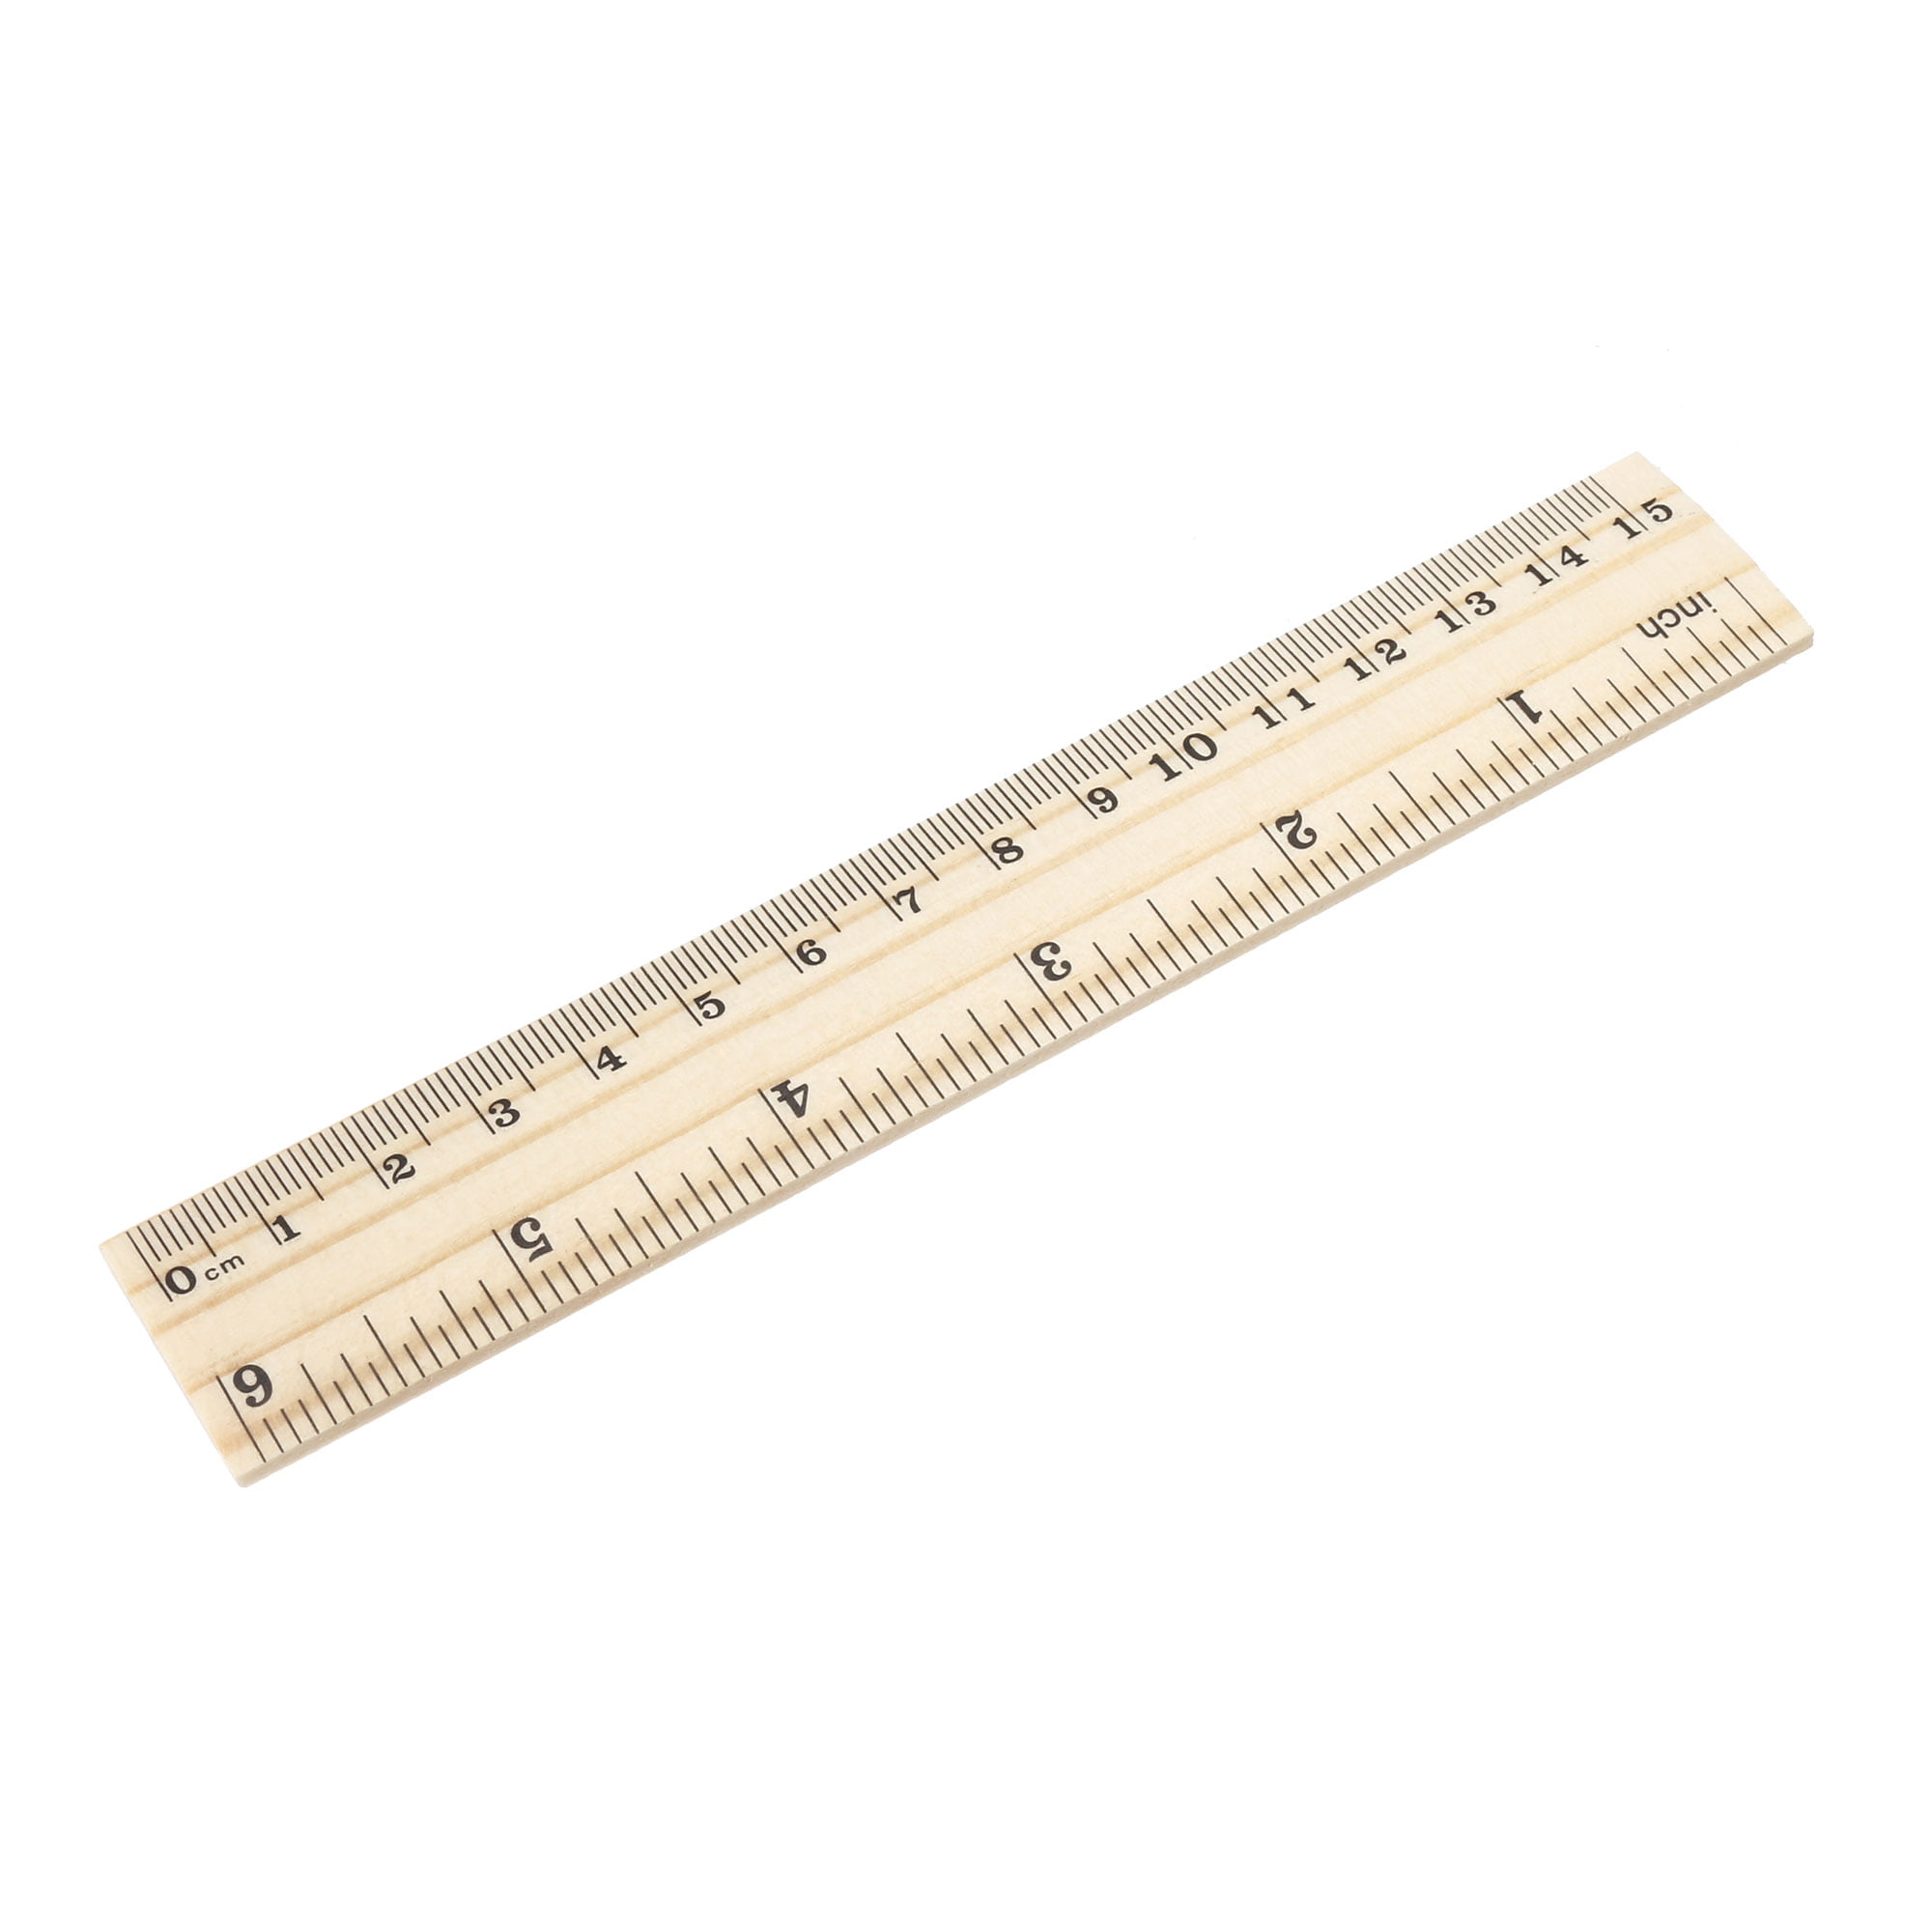 wood-ruler-15cm-6-inch-2-scale-office-rulers-wooden-measuring-ruler